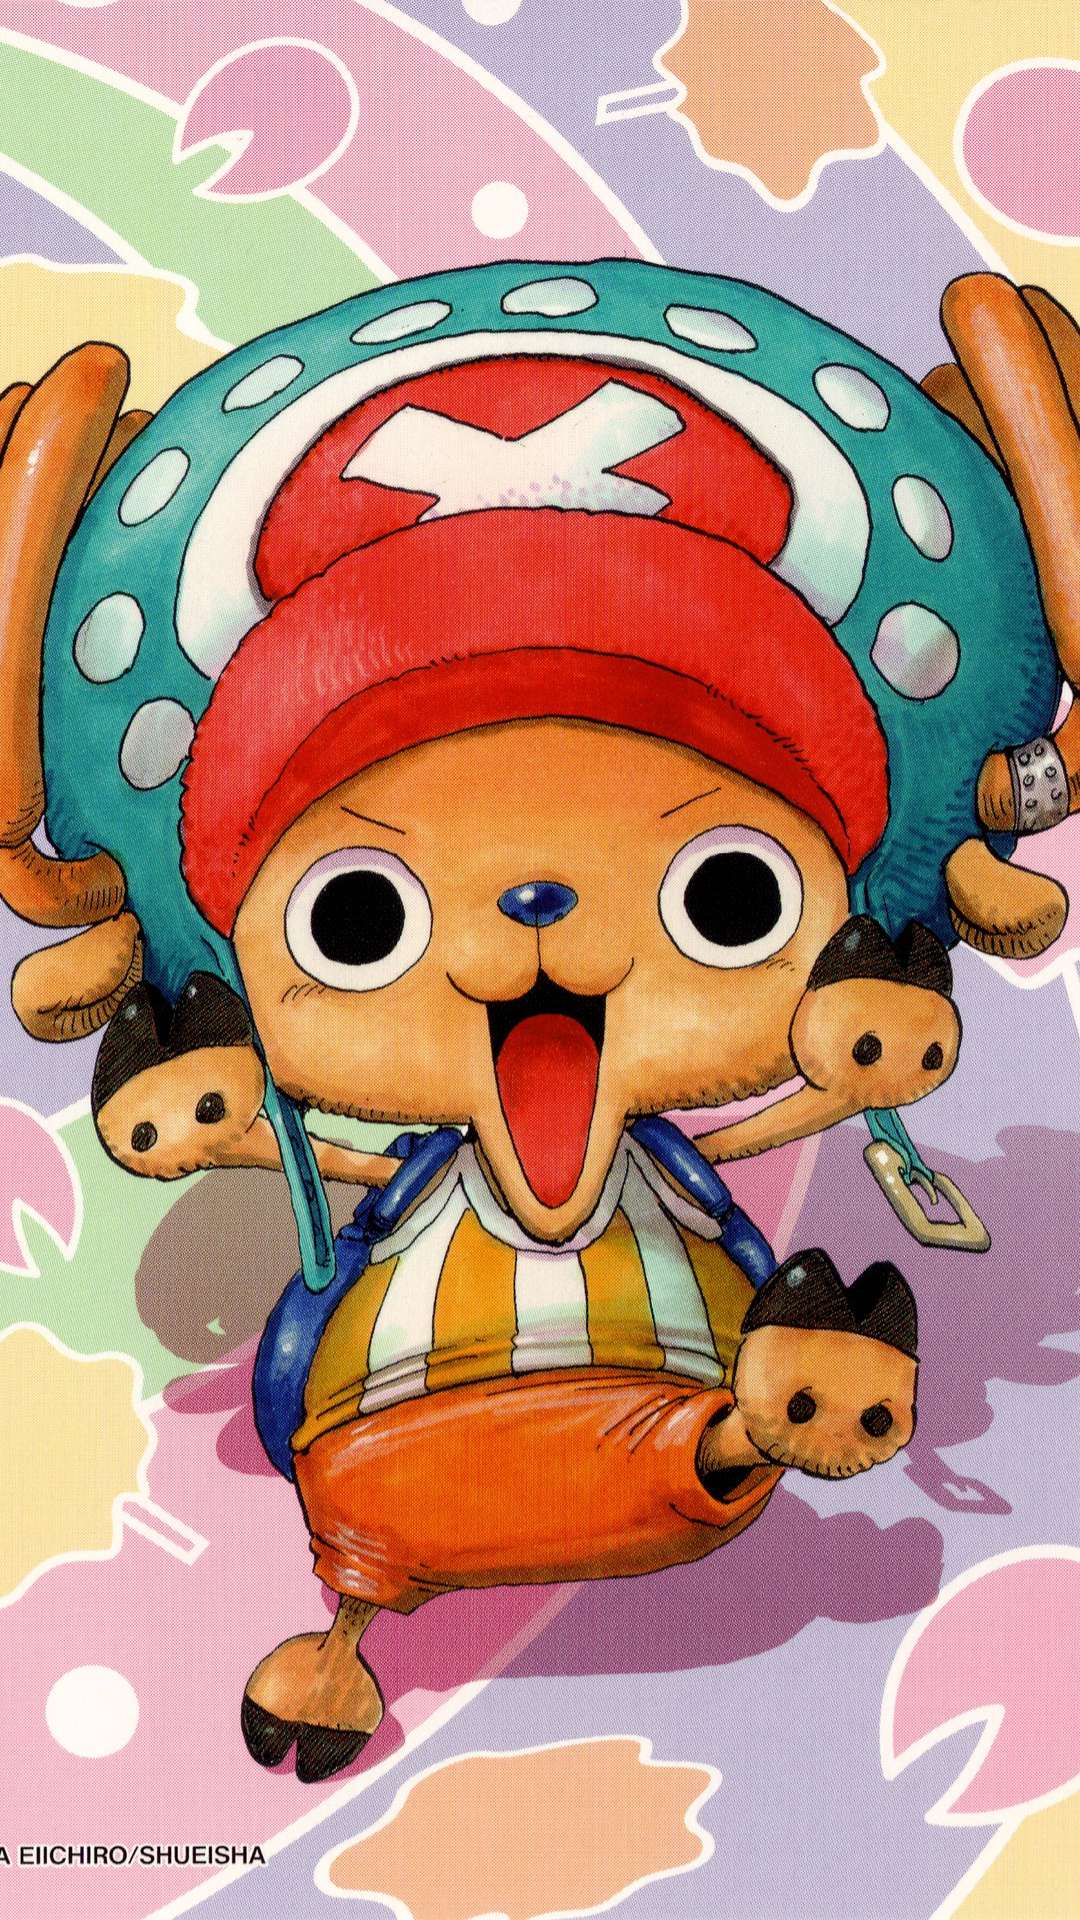 6 Tony Tony Chopper Wallpapers for iPhone and Android by Tim Chan